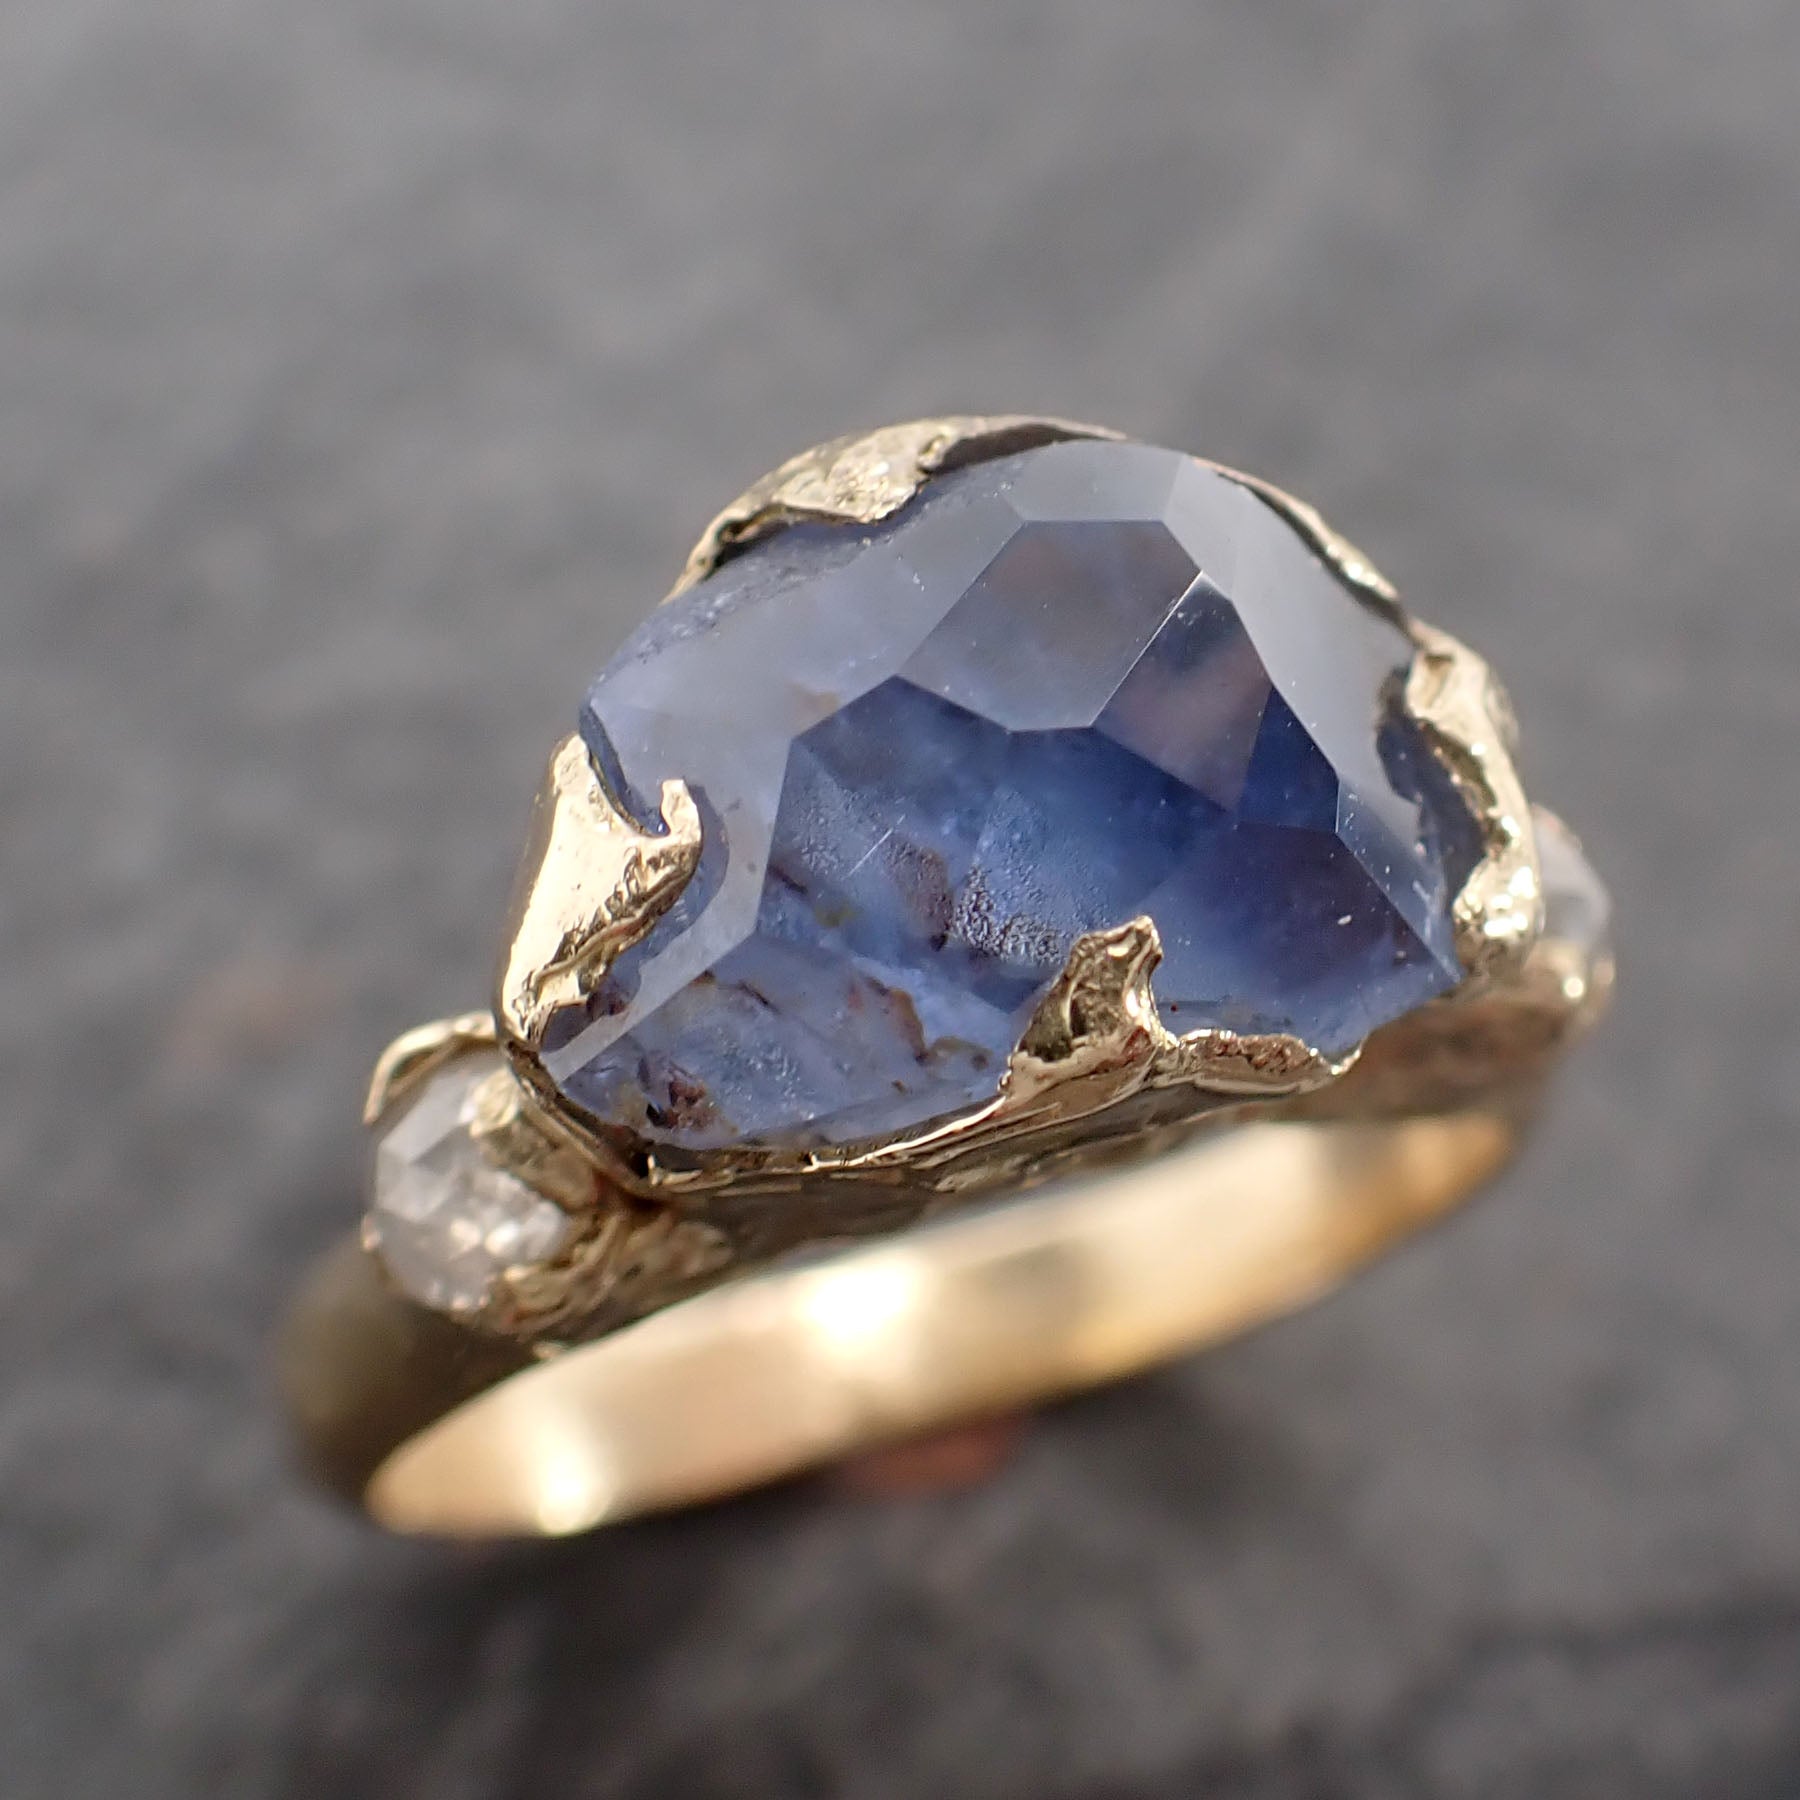 partially faceted blue montana sapphire and fancy diamonds 18k yellow gold engagement wedding ring gemstone ring multi stone ring 2515 Alternative Engagement